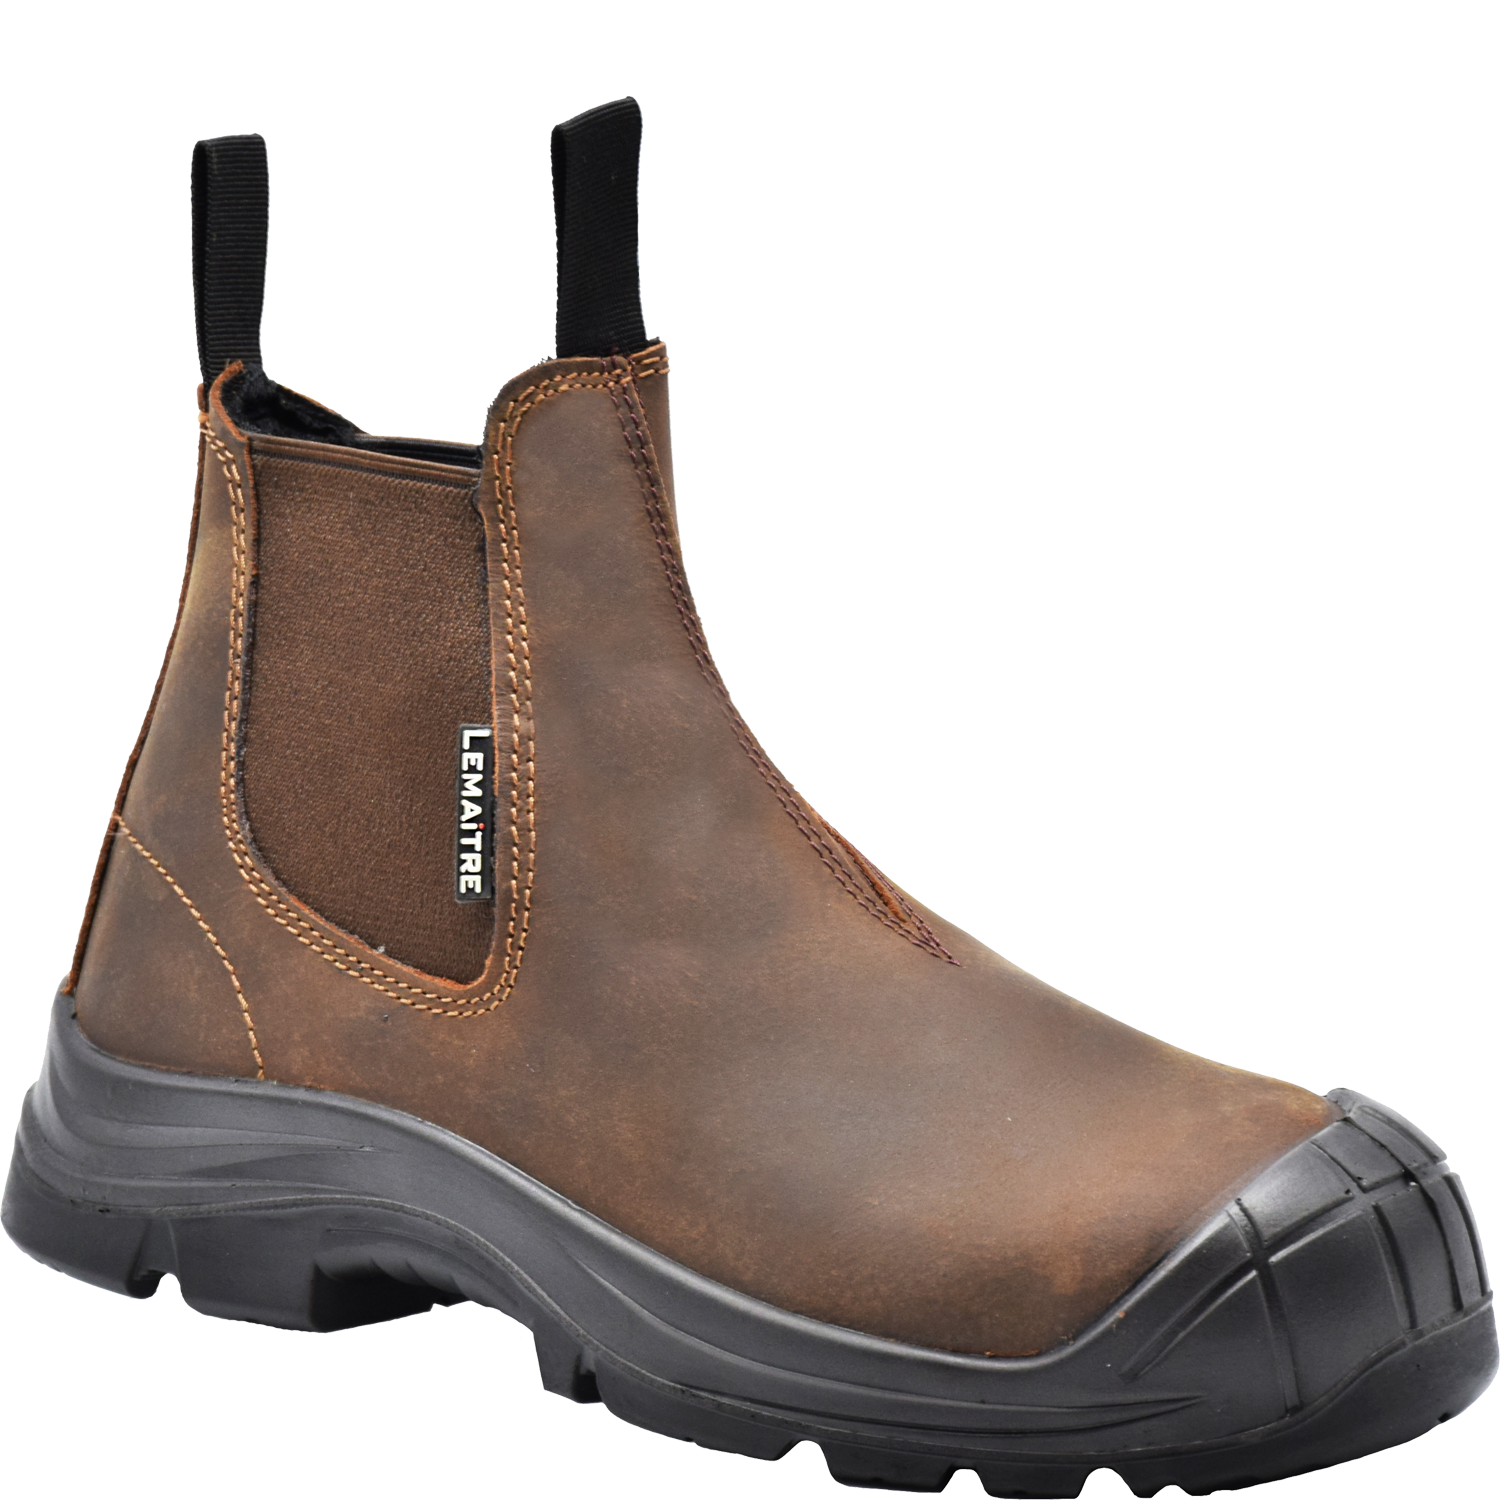 Lemaitre Stiefel Rover S3 Braun  